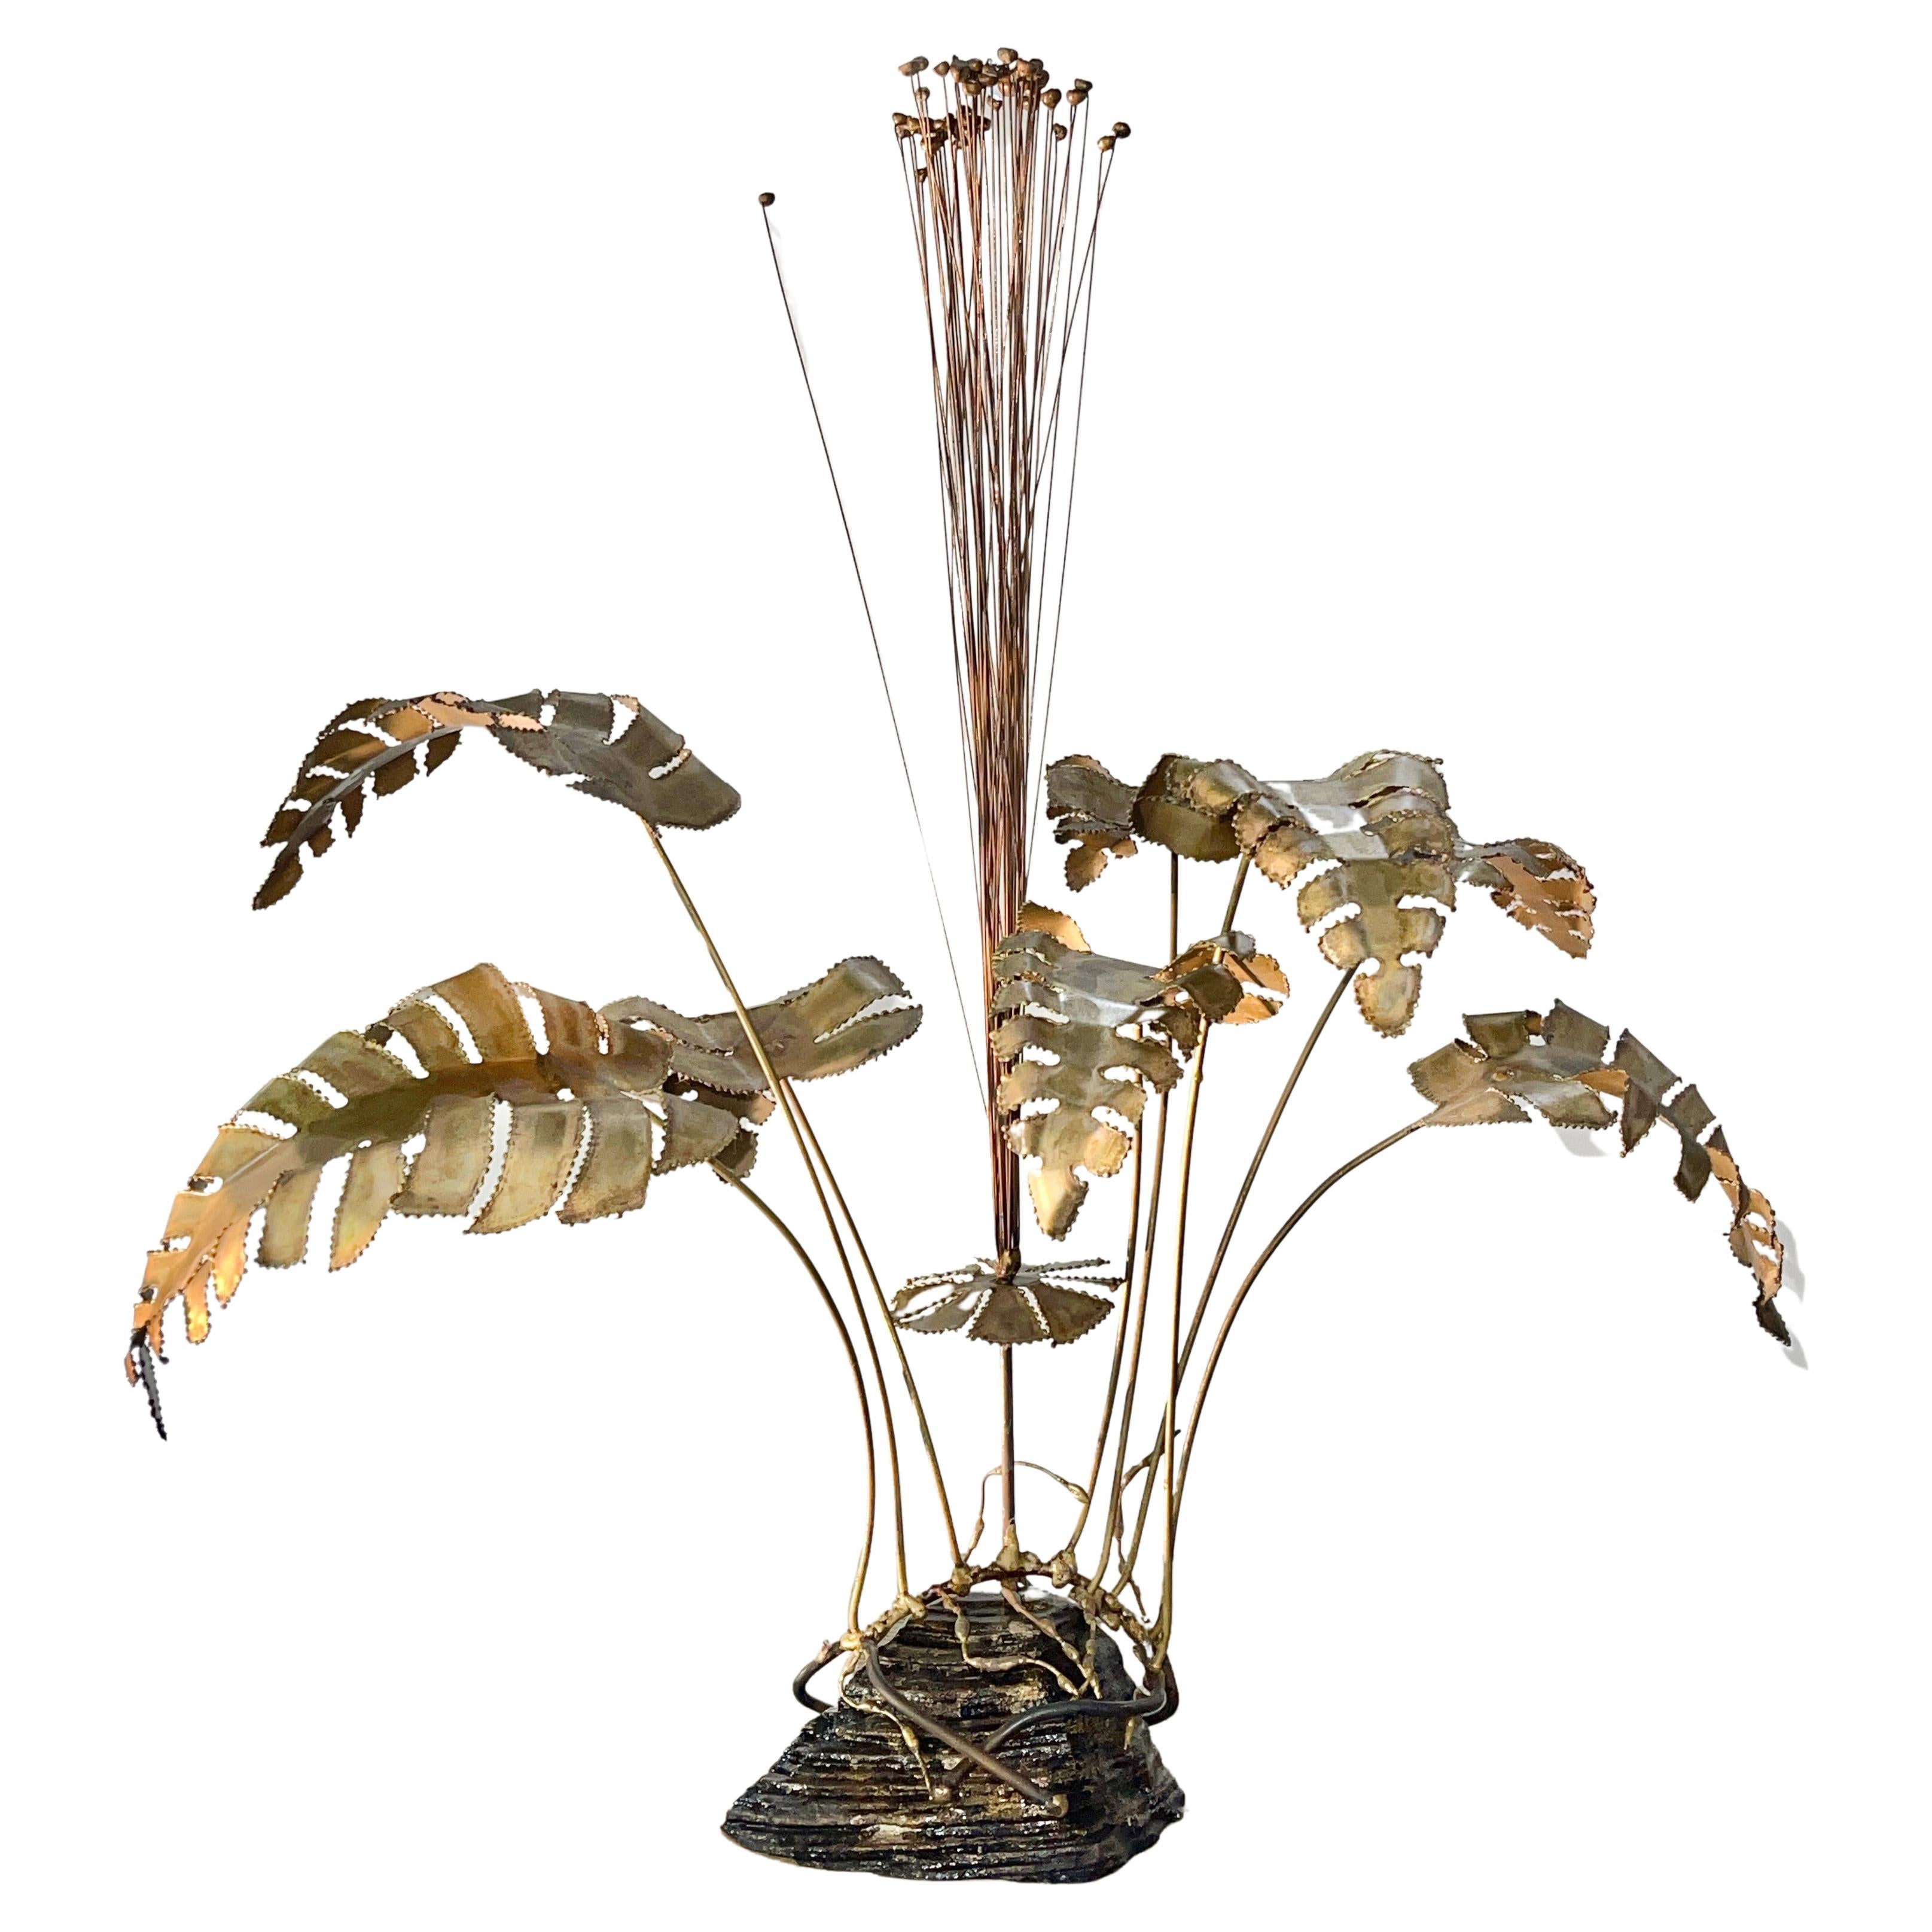 Torch Cut Floral Arrangement from Brotman's Sausalito For Sale